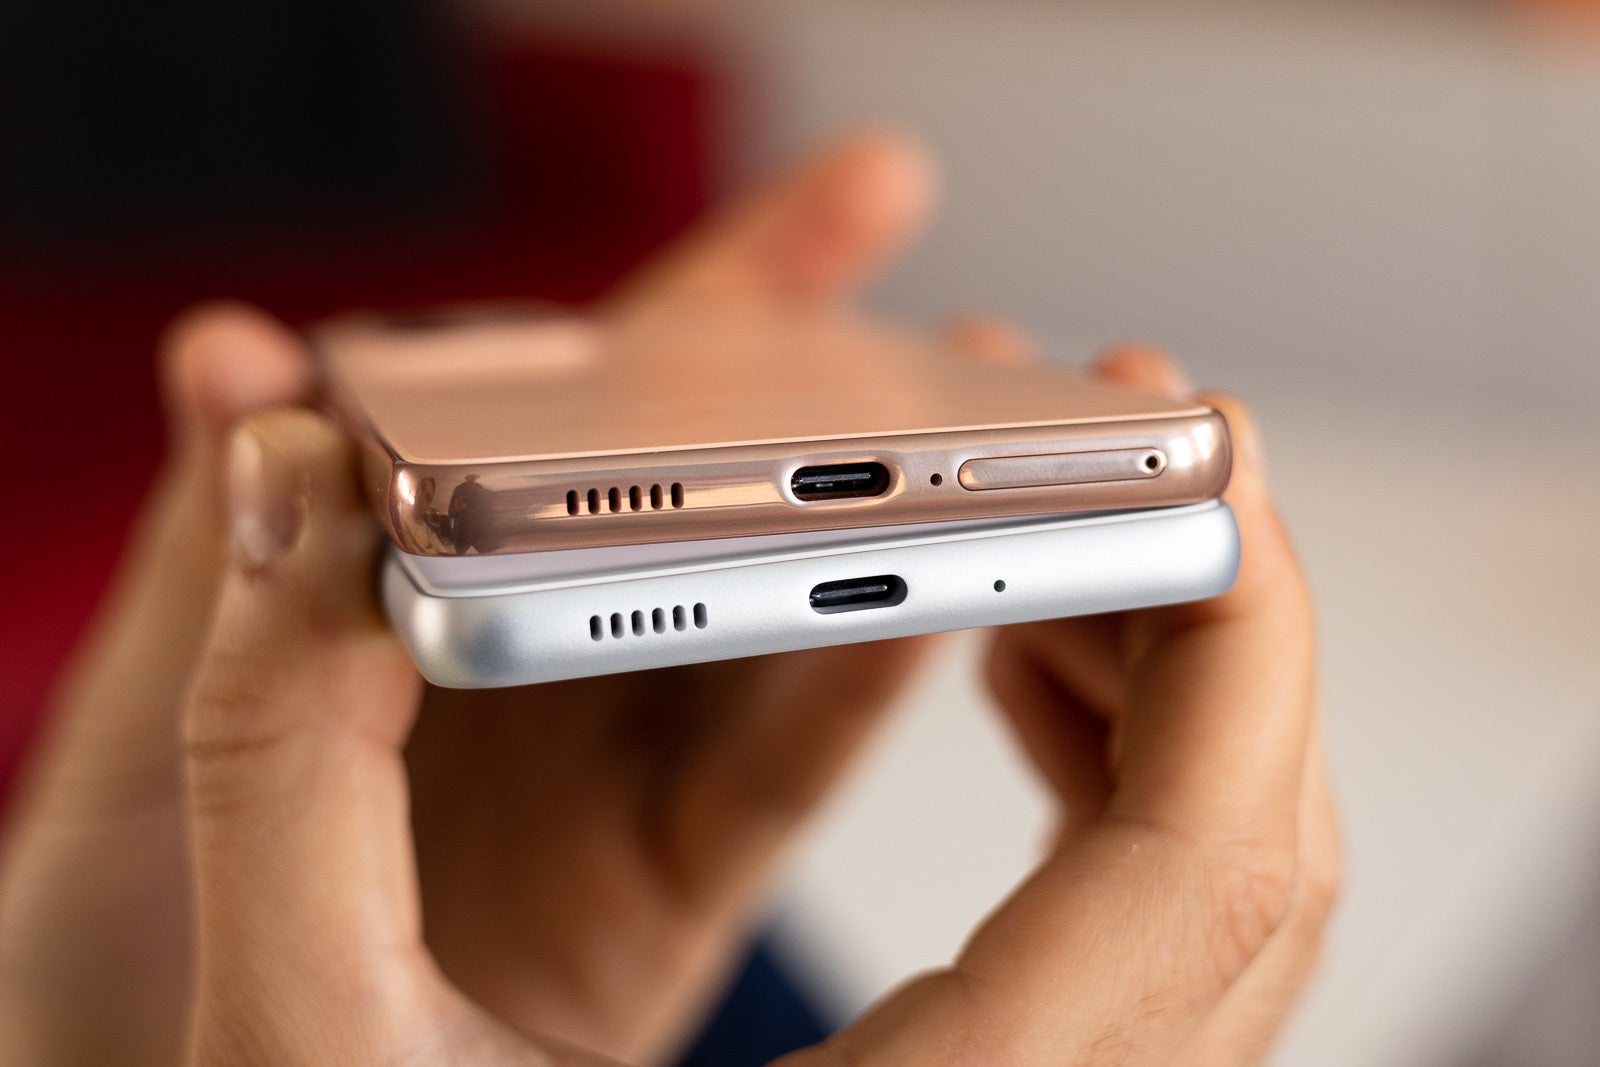 No headphone jack on either one - Samsung Galaxy A53 5G vs Galaxy A33 5G: all the differences